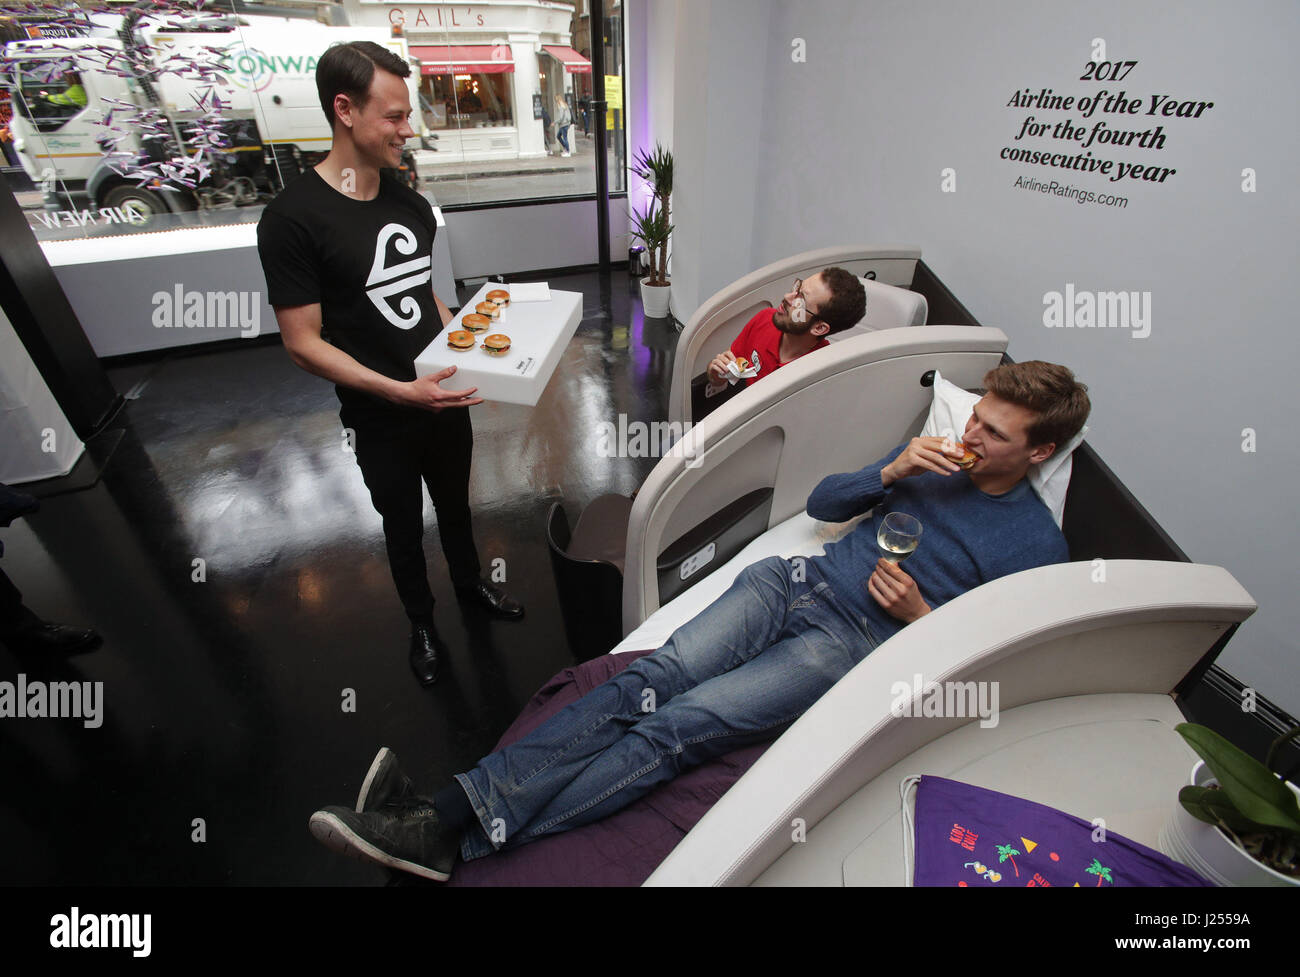 Members of the public Johann Bigler (right) and Fabio Battiato are served snacks by Lachlan McDonald as they sample Business Premier lie-flat seats in a mock-up aircraft cabin, during the launch of Air New Zealands pop-up event 'This is How We Fly', which showcases the airlines on-board facilities, in Soho, London. Stock Photo